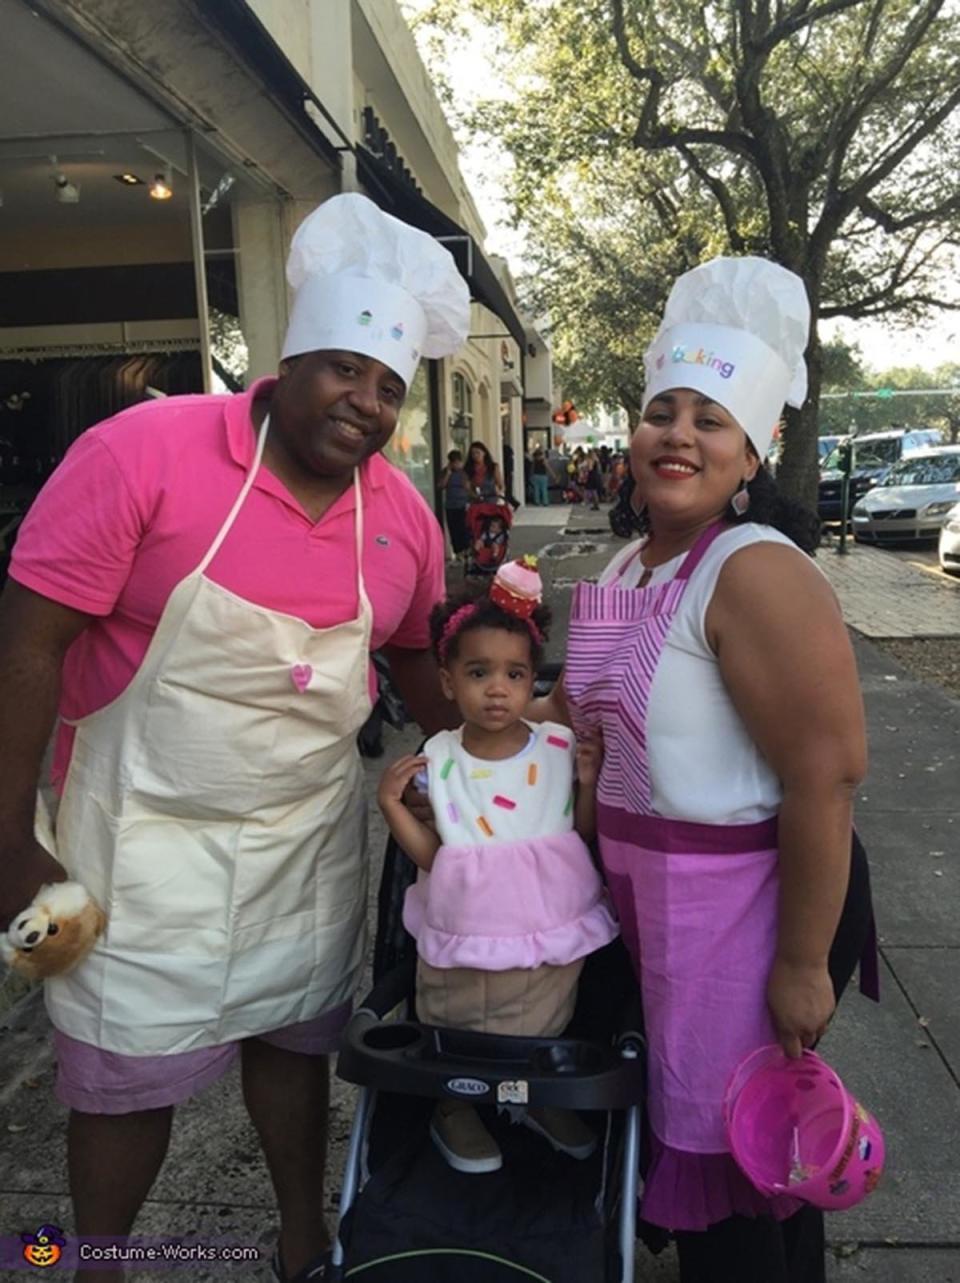 Via <a href="http://www.costume-works.com/costumes_for_families/the-bakers-and-their-cupcake.html" target="_blank">Costume Works</a>